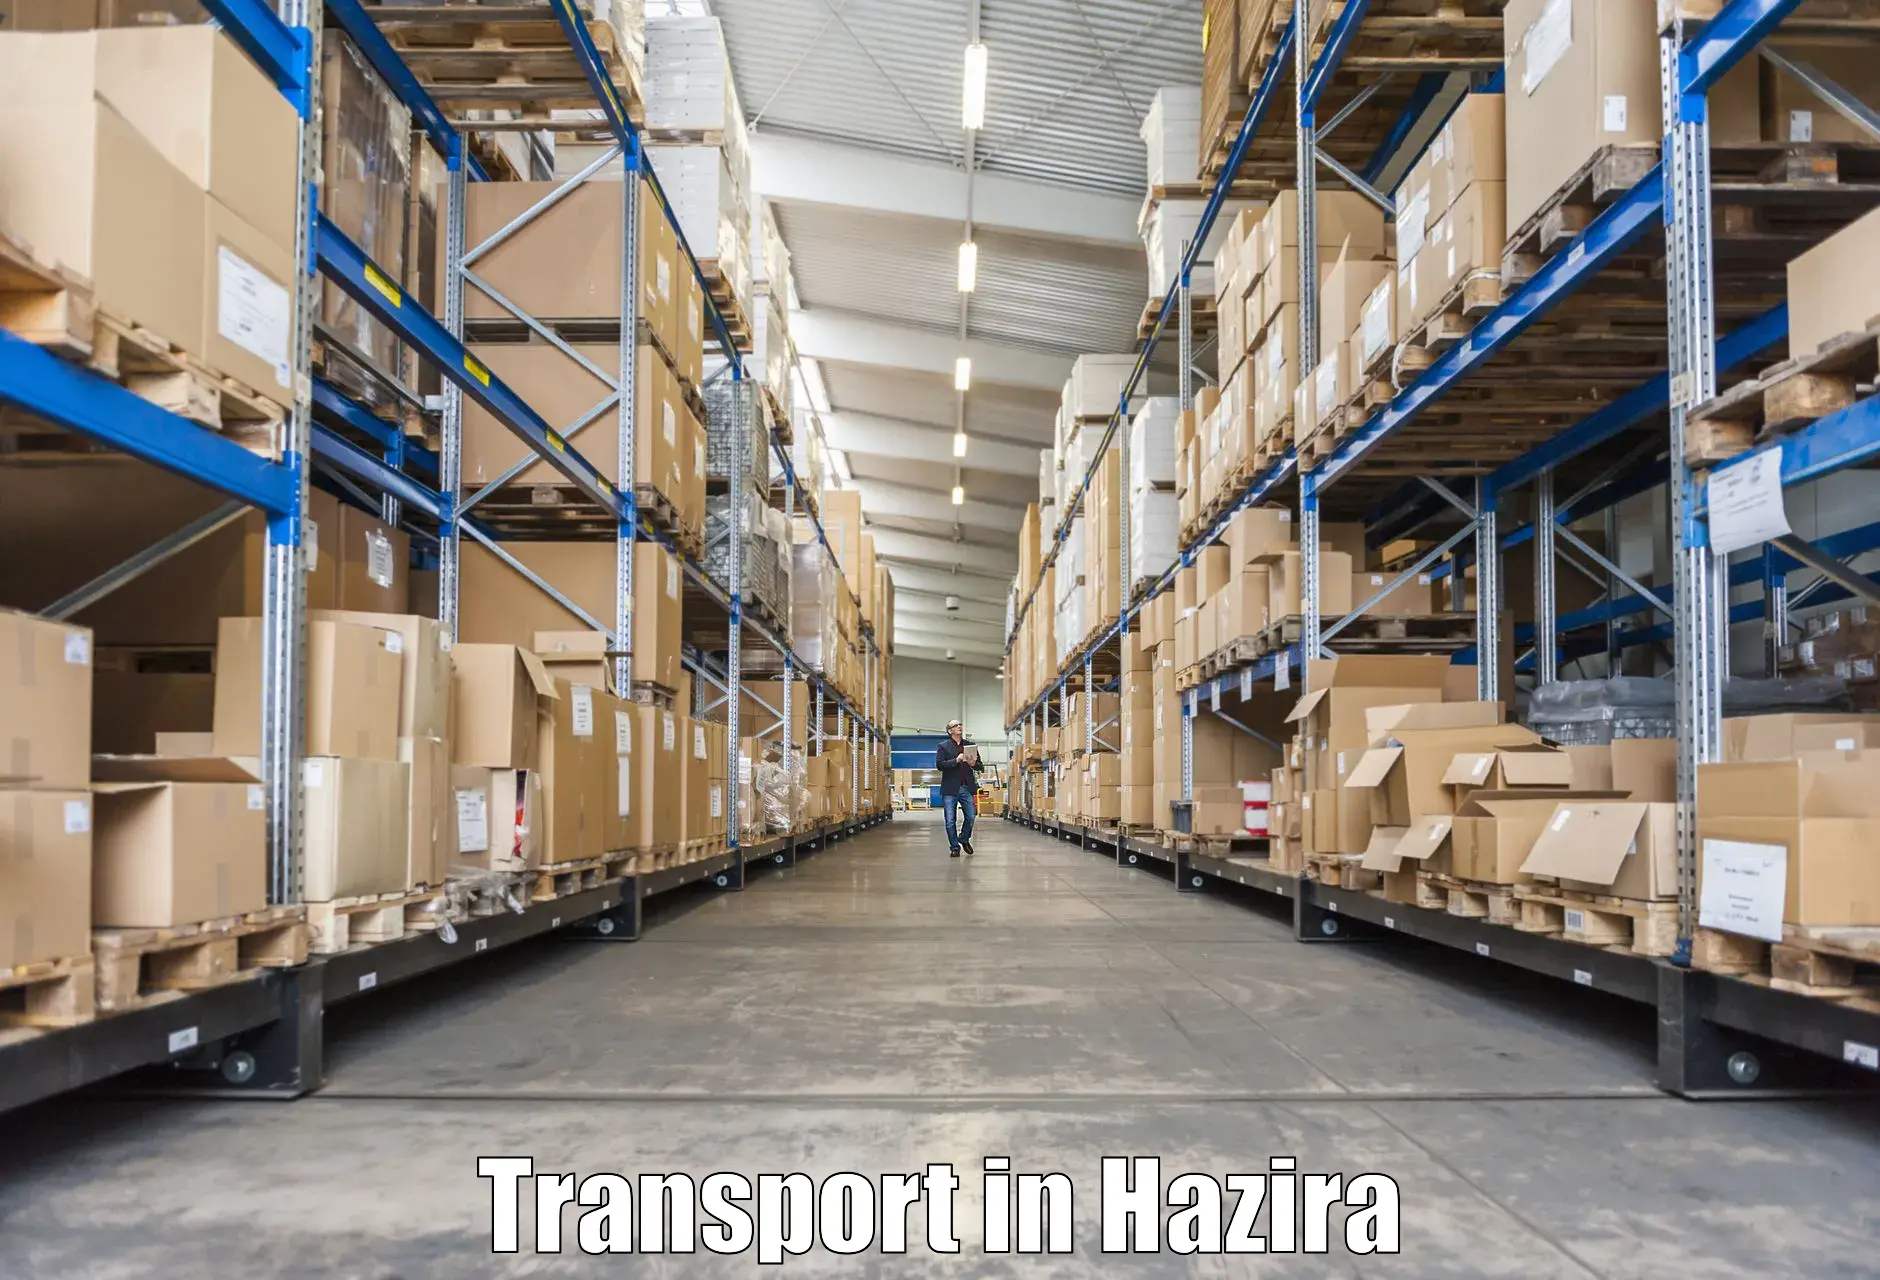 Vehicle transport services in Hazira